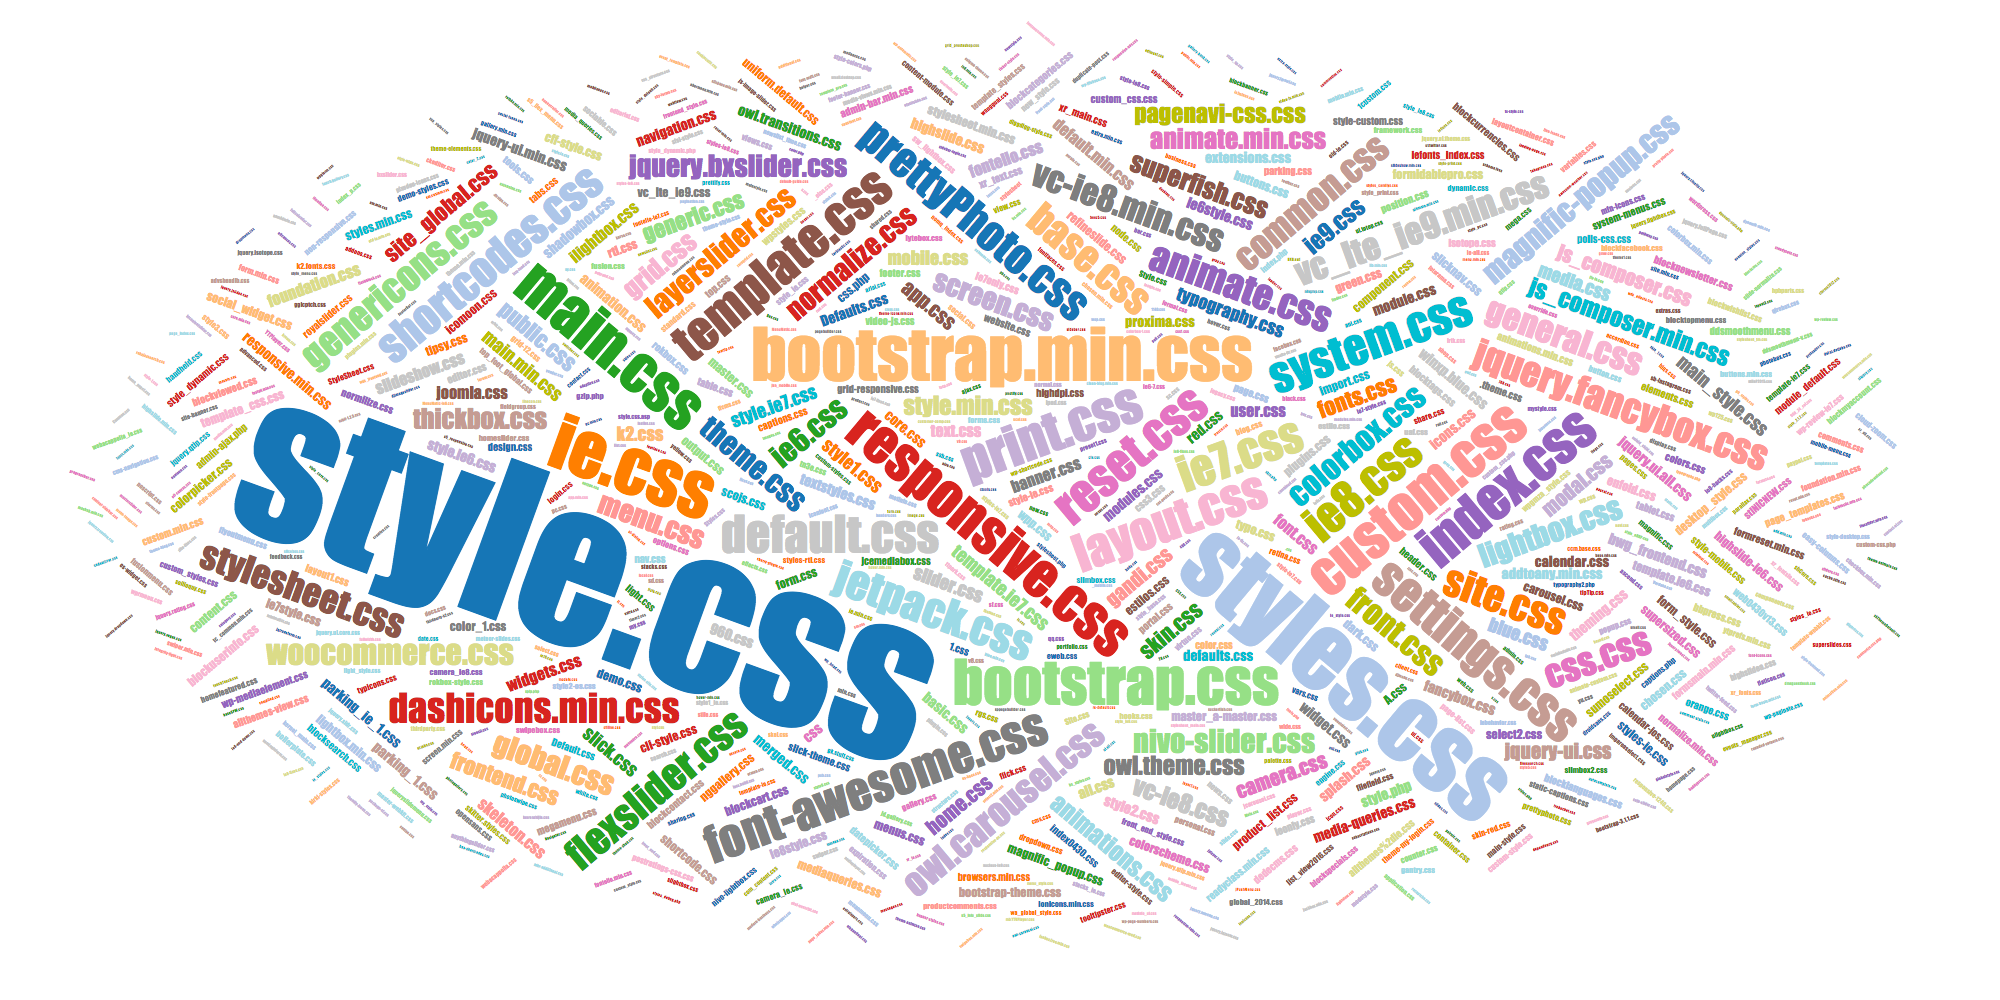 Popular names of CSS files home.css, highslide.css, etc.